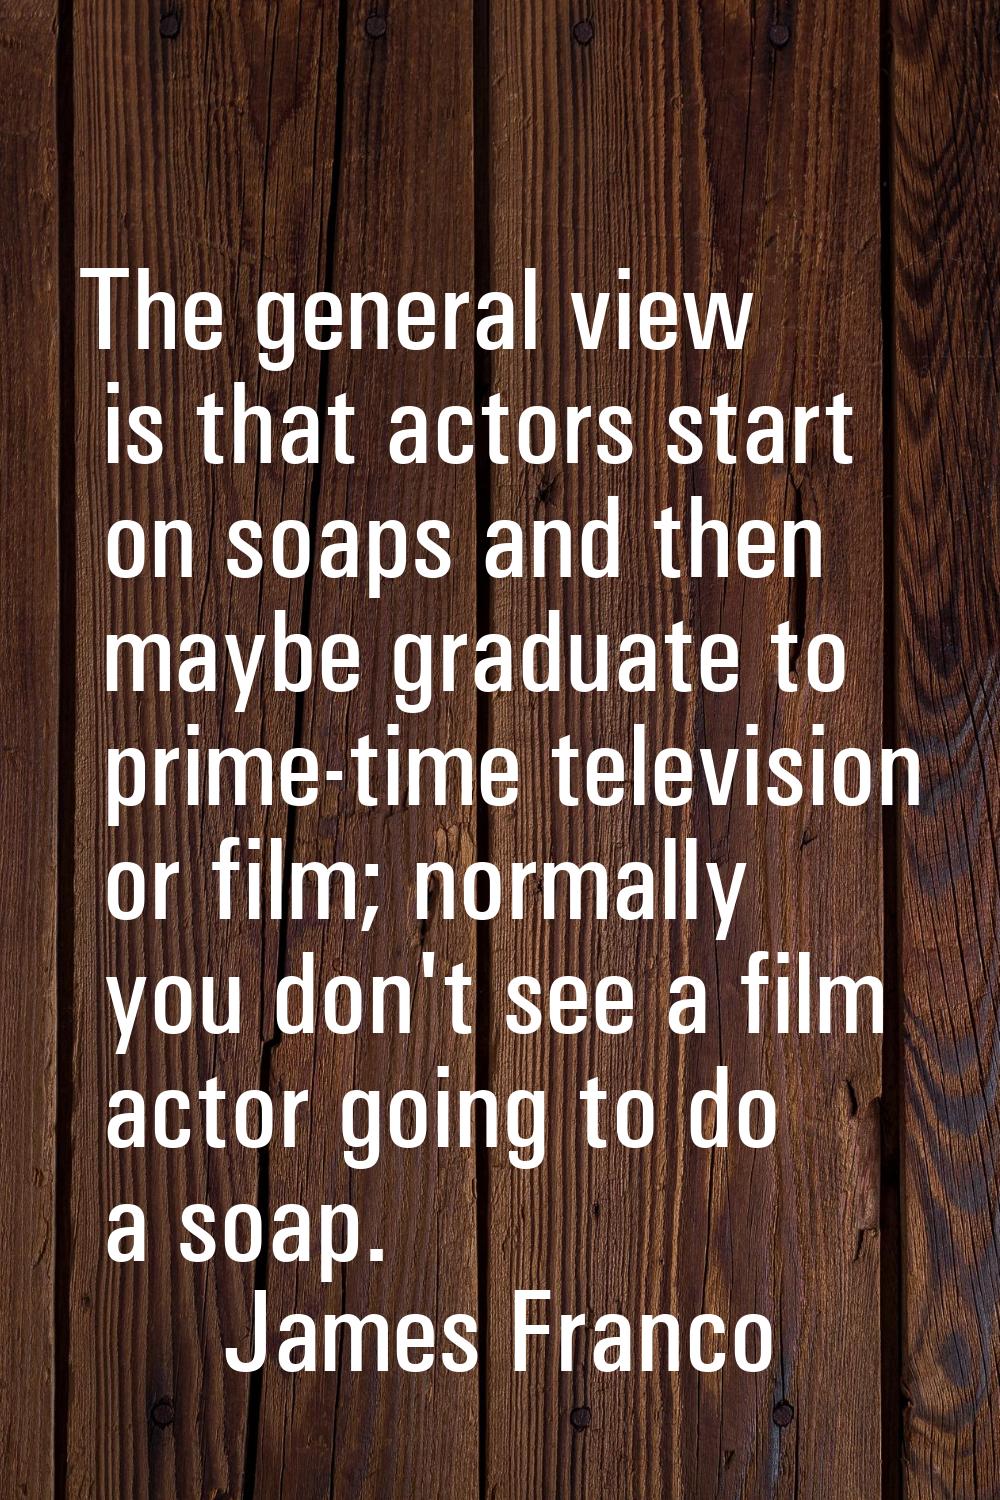 The general view is that actors start on soaps and then maybe graduate to prime-time television or 